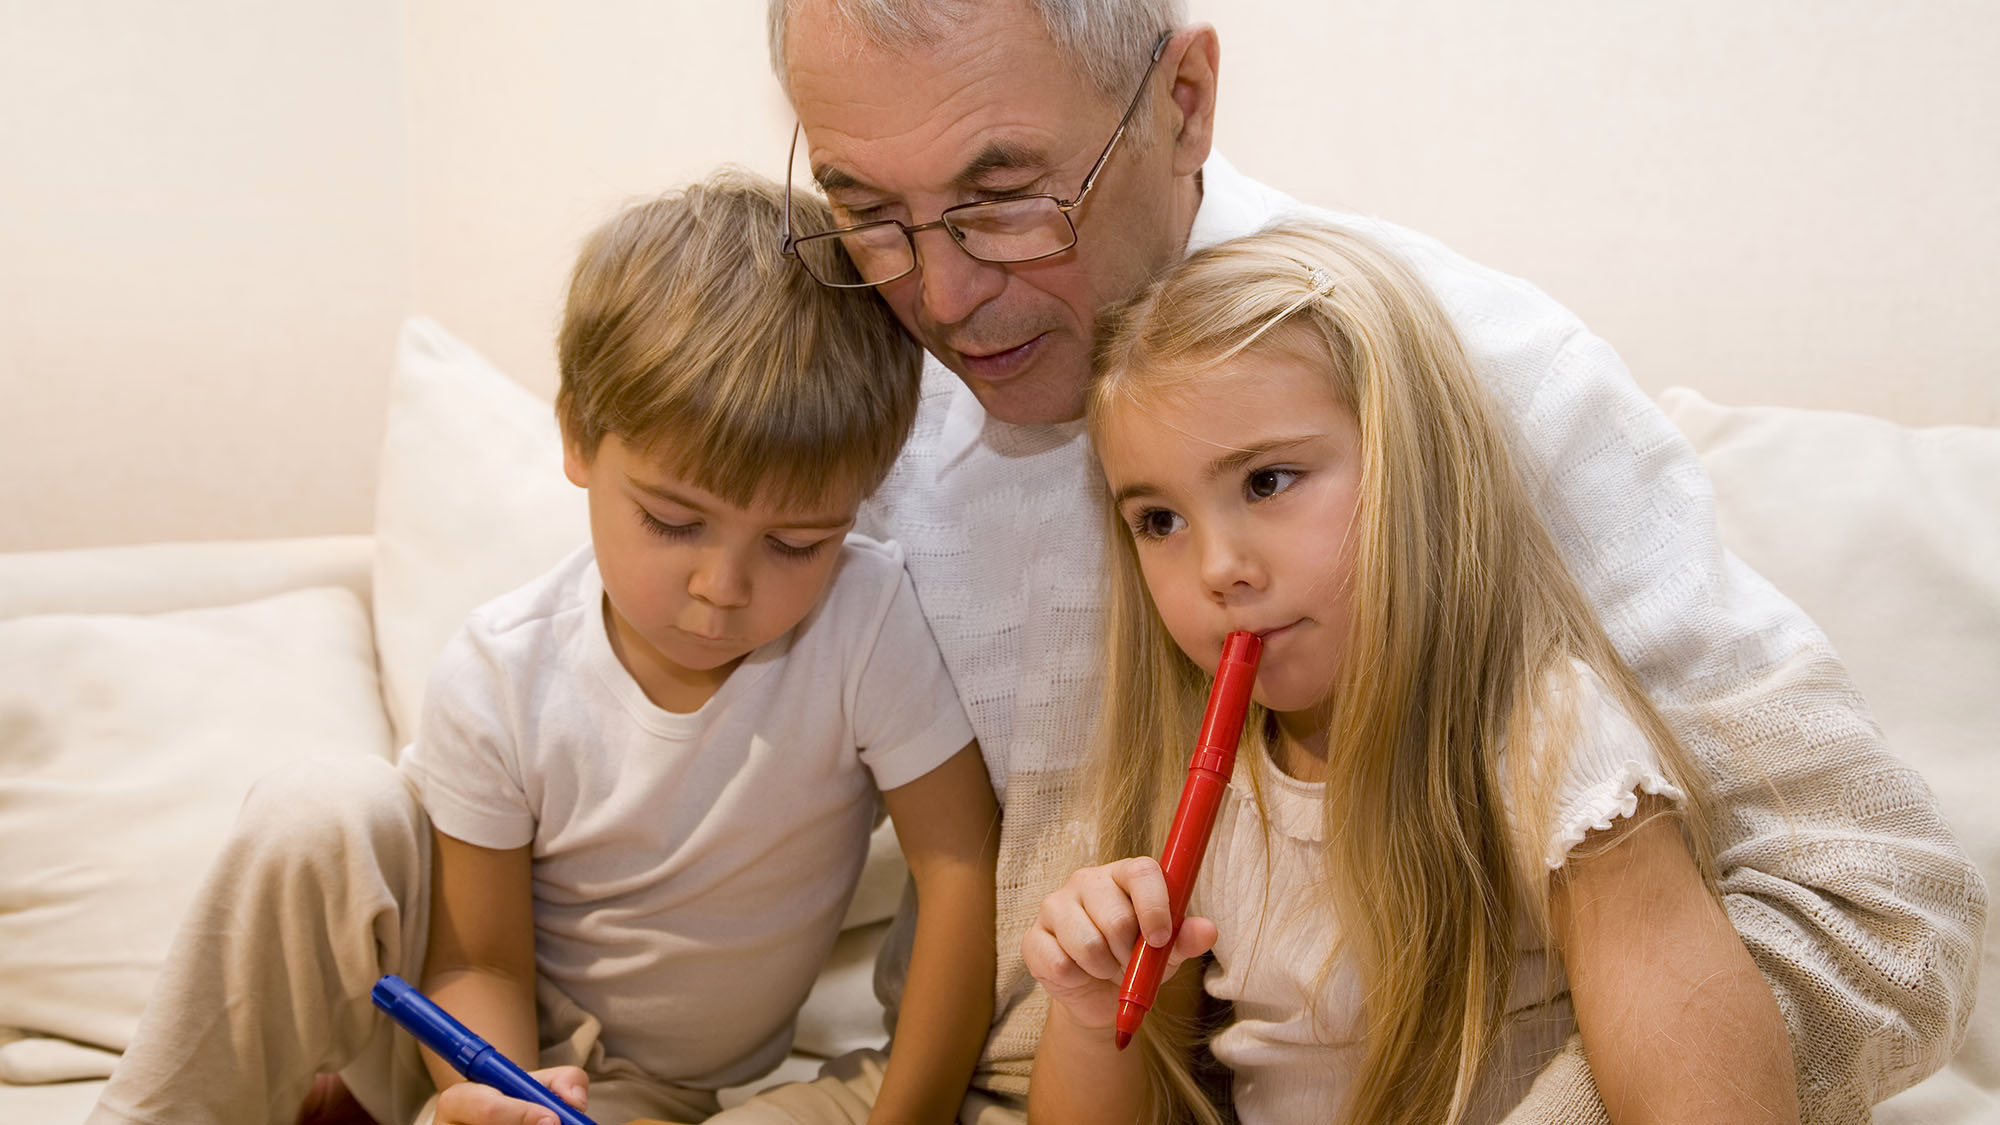 When asked to write about their grandparents, these 8-year-olds had the most hilarious responses 